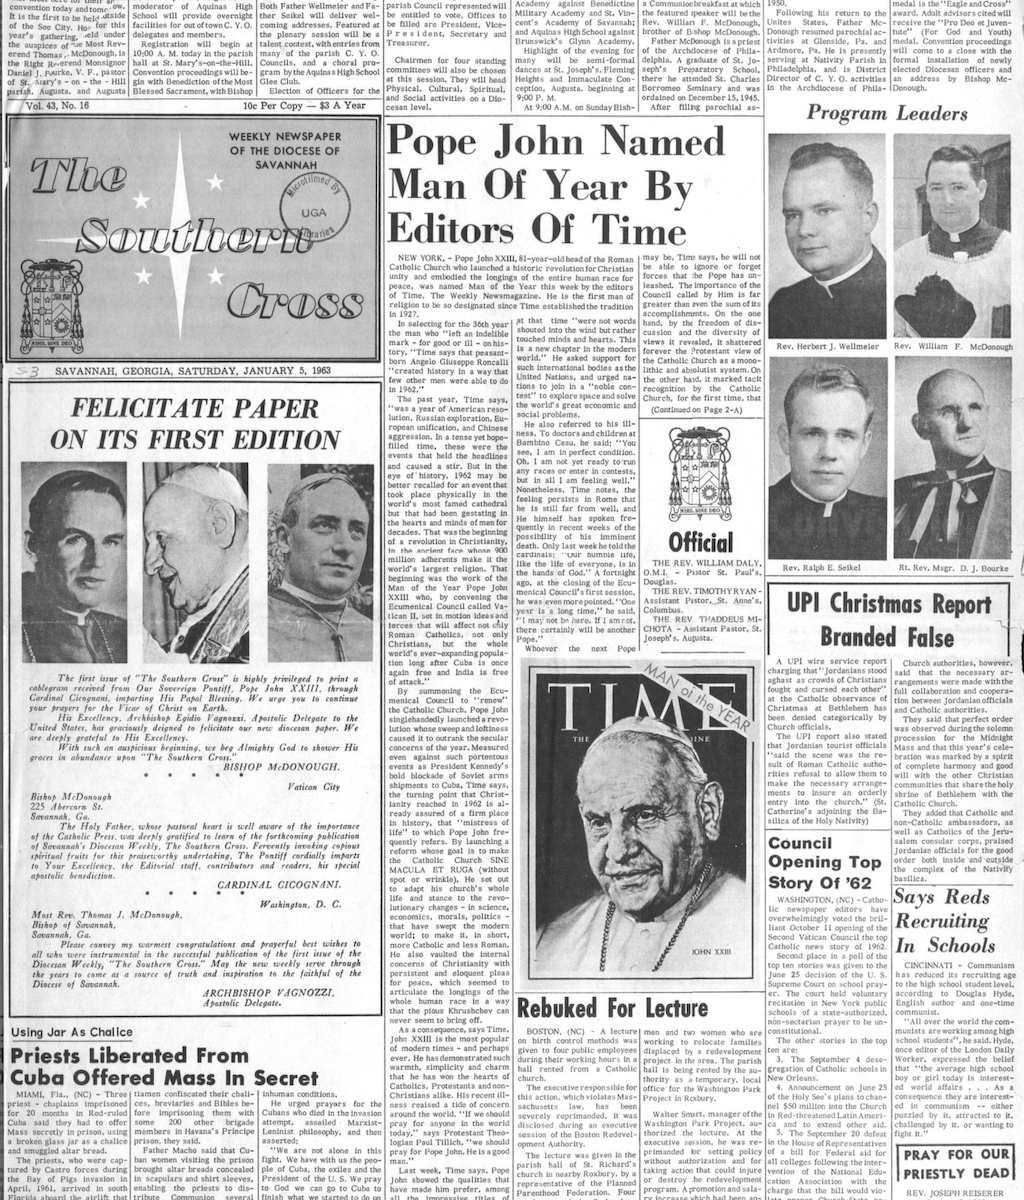 Issues of the Southern Cross, the weekly newspaper of the Diocese ...